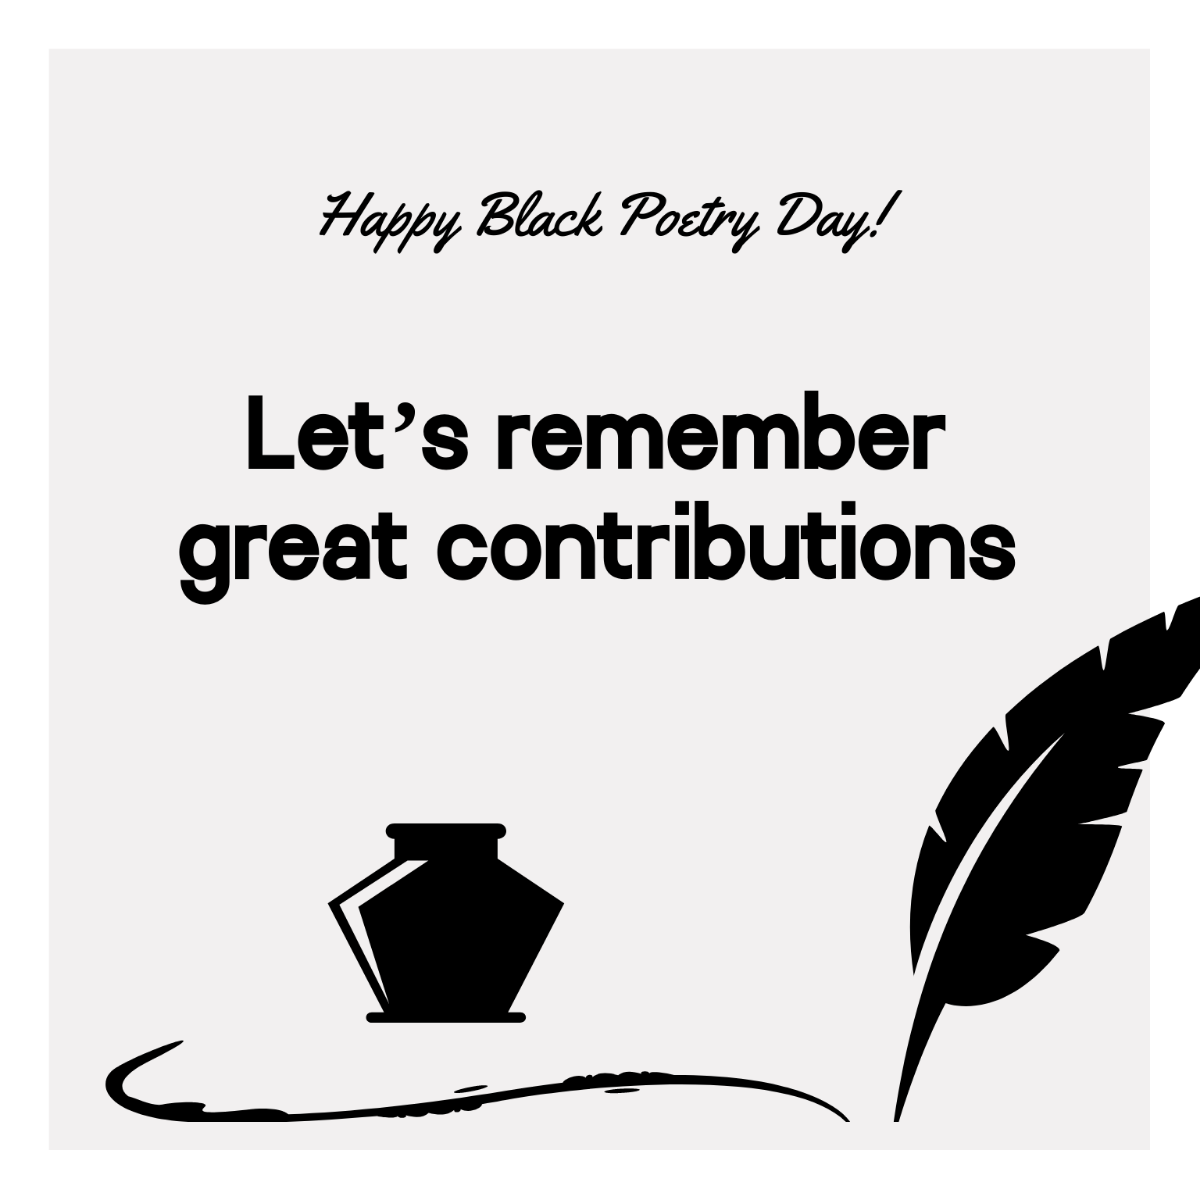 Black Poetry Day Greeting Card Vector Template